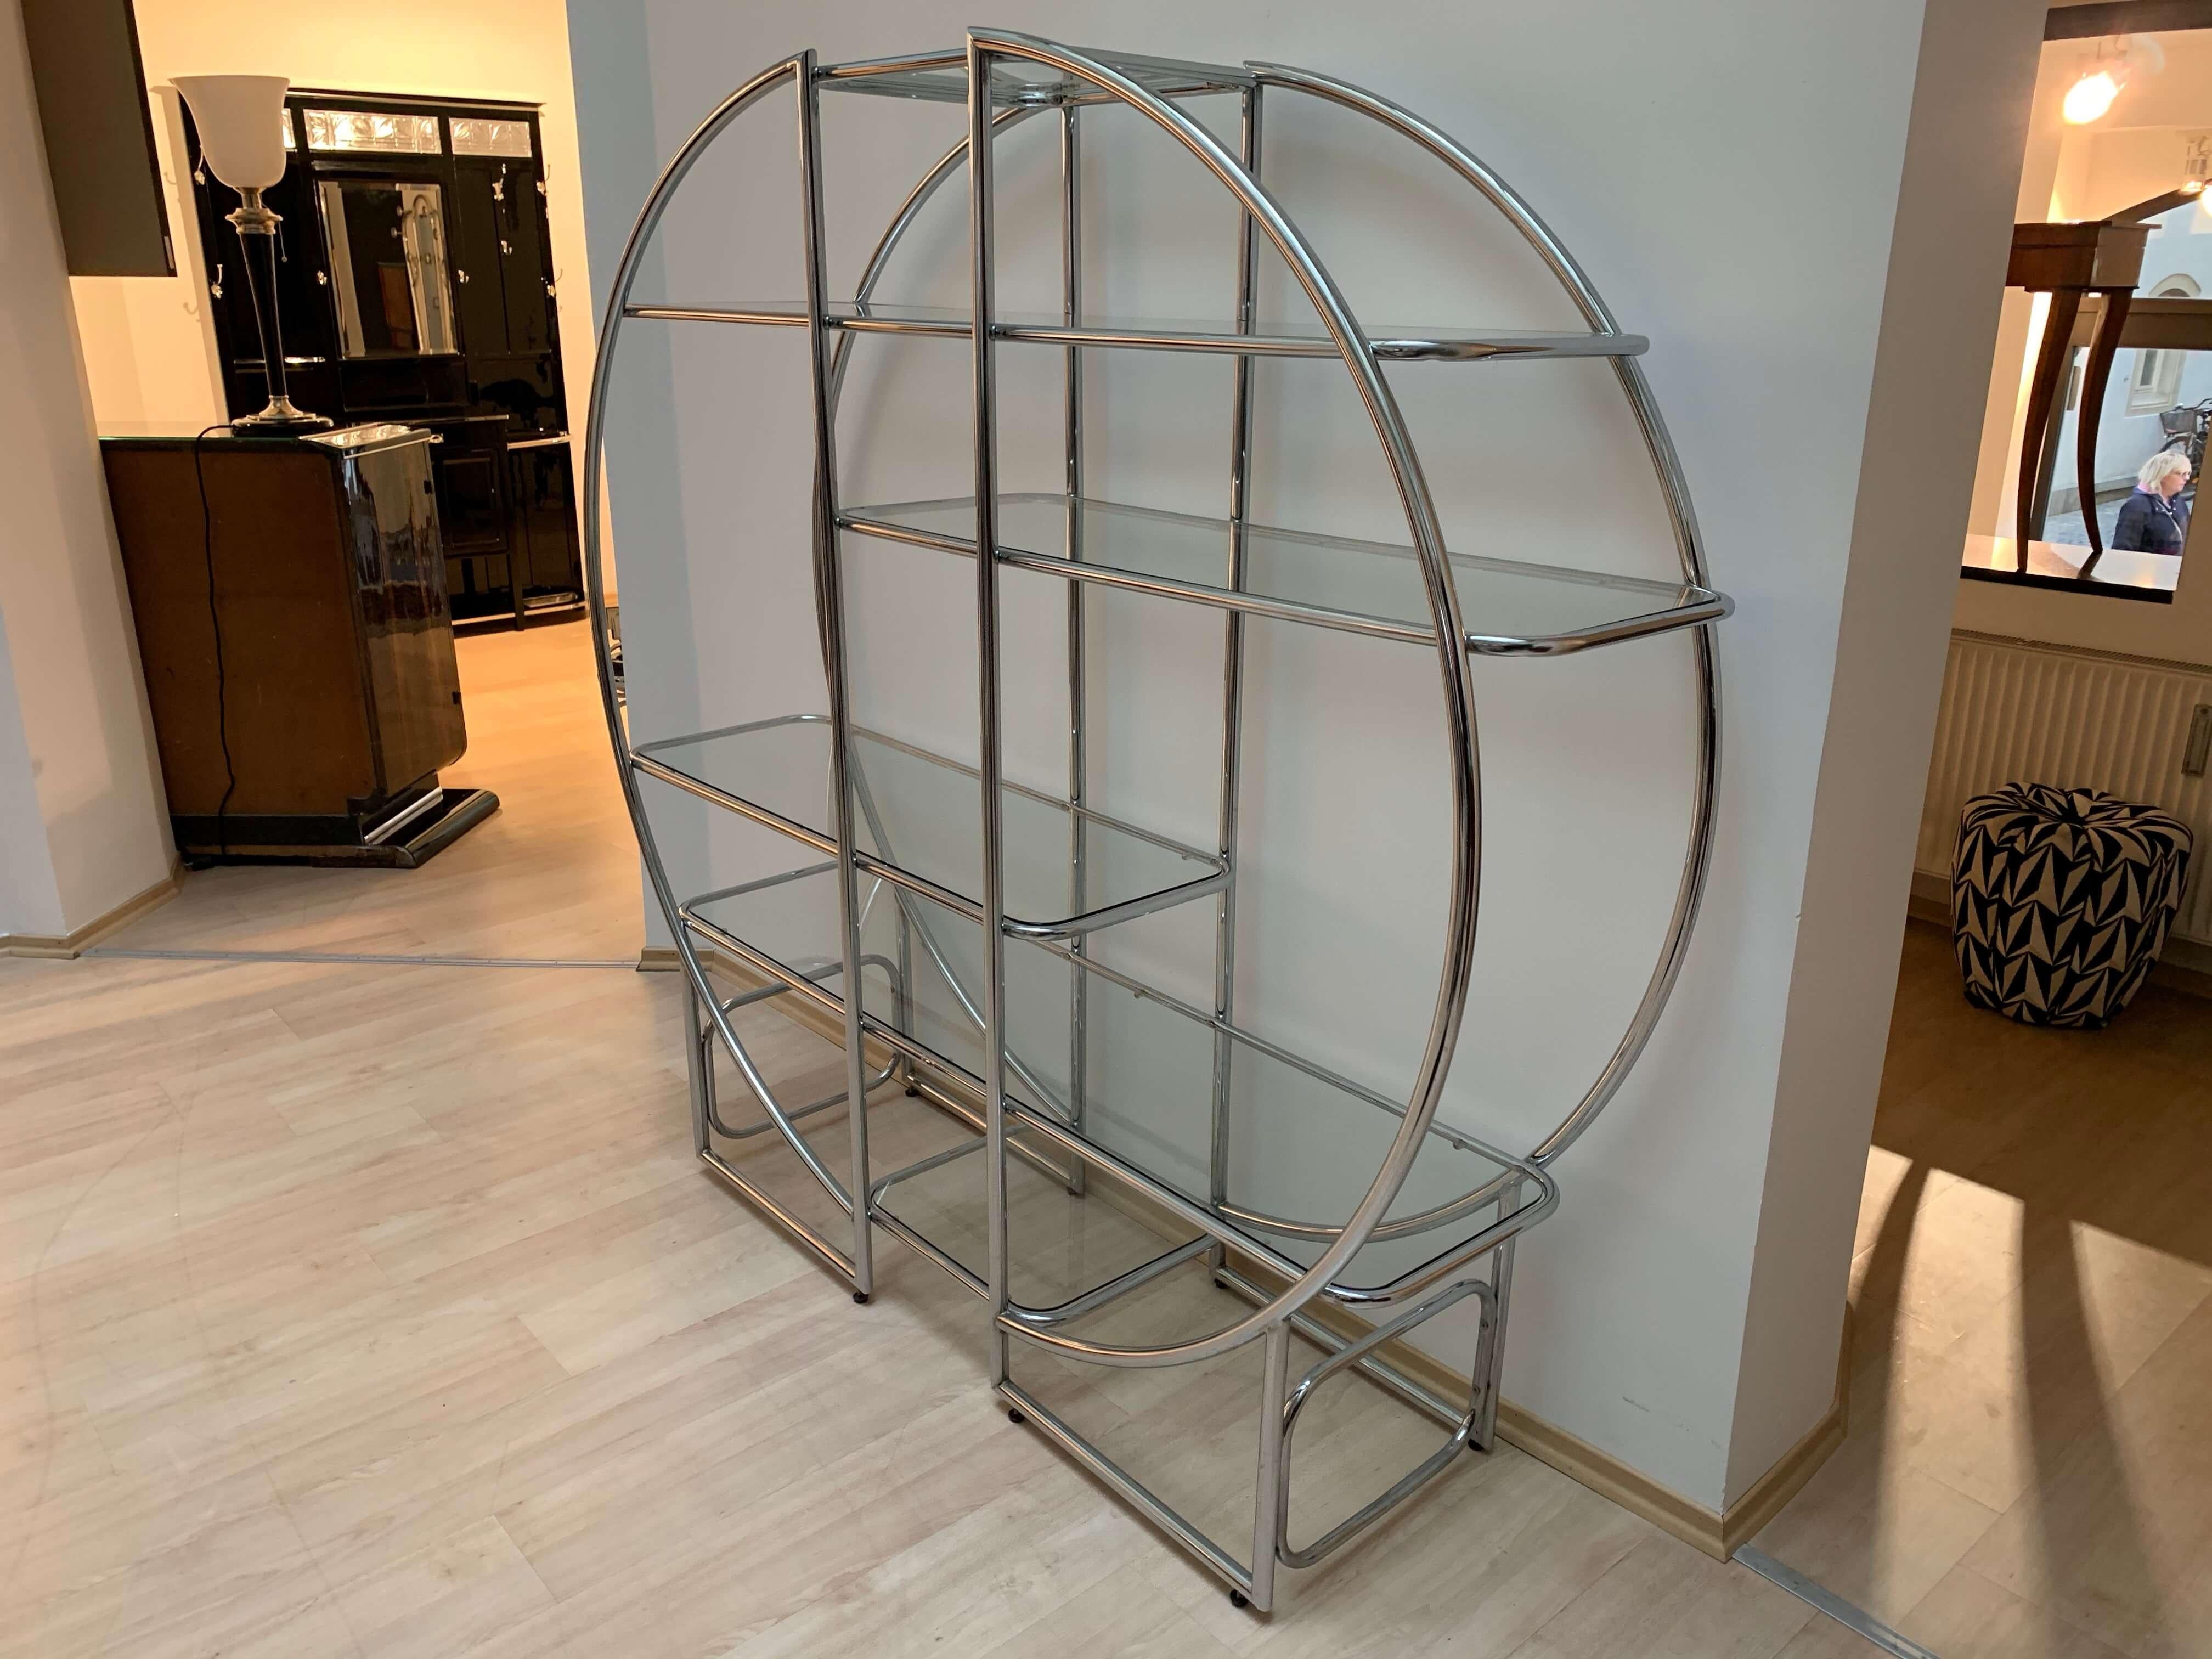 Mid-20th Century Bauhaus Style Shelf, Chrome-Plated Steeltubes and Glass, Germany, 1950s